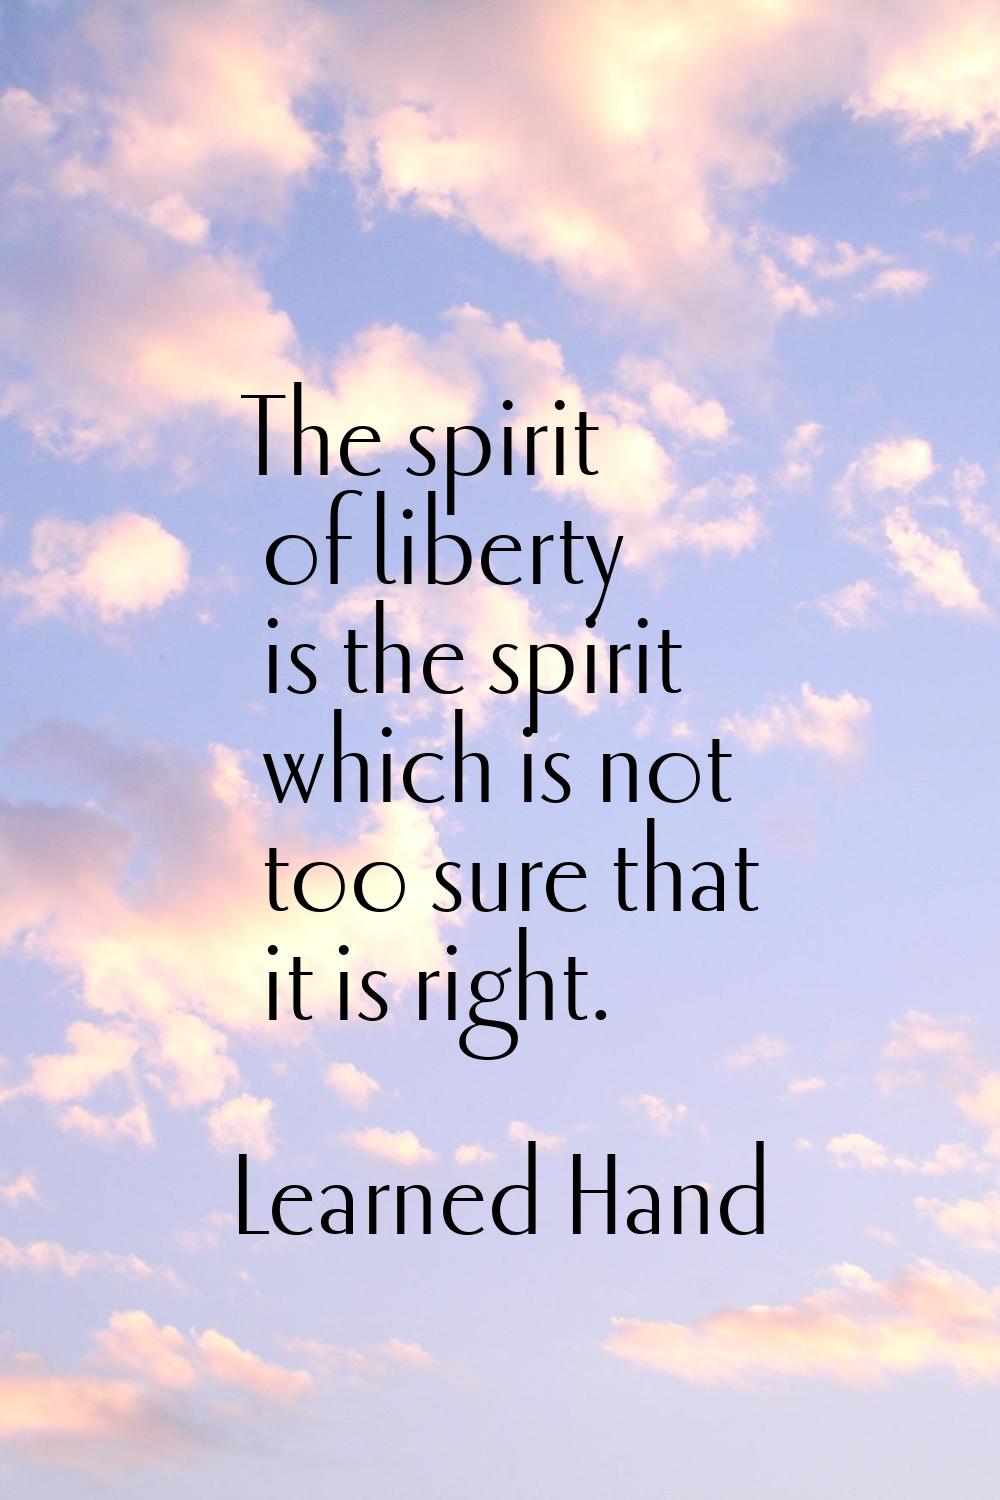 The spirit of liberty is the spirit which is not too sure that it is right.